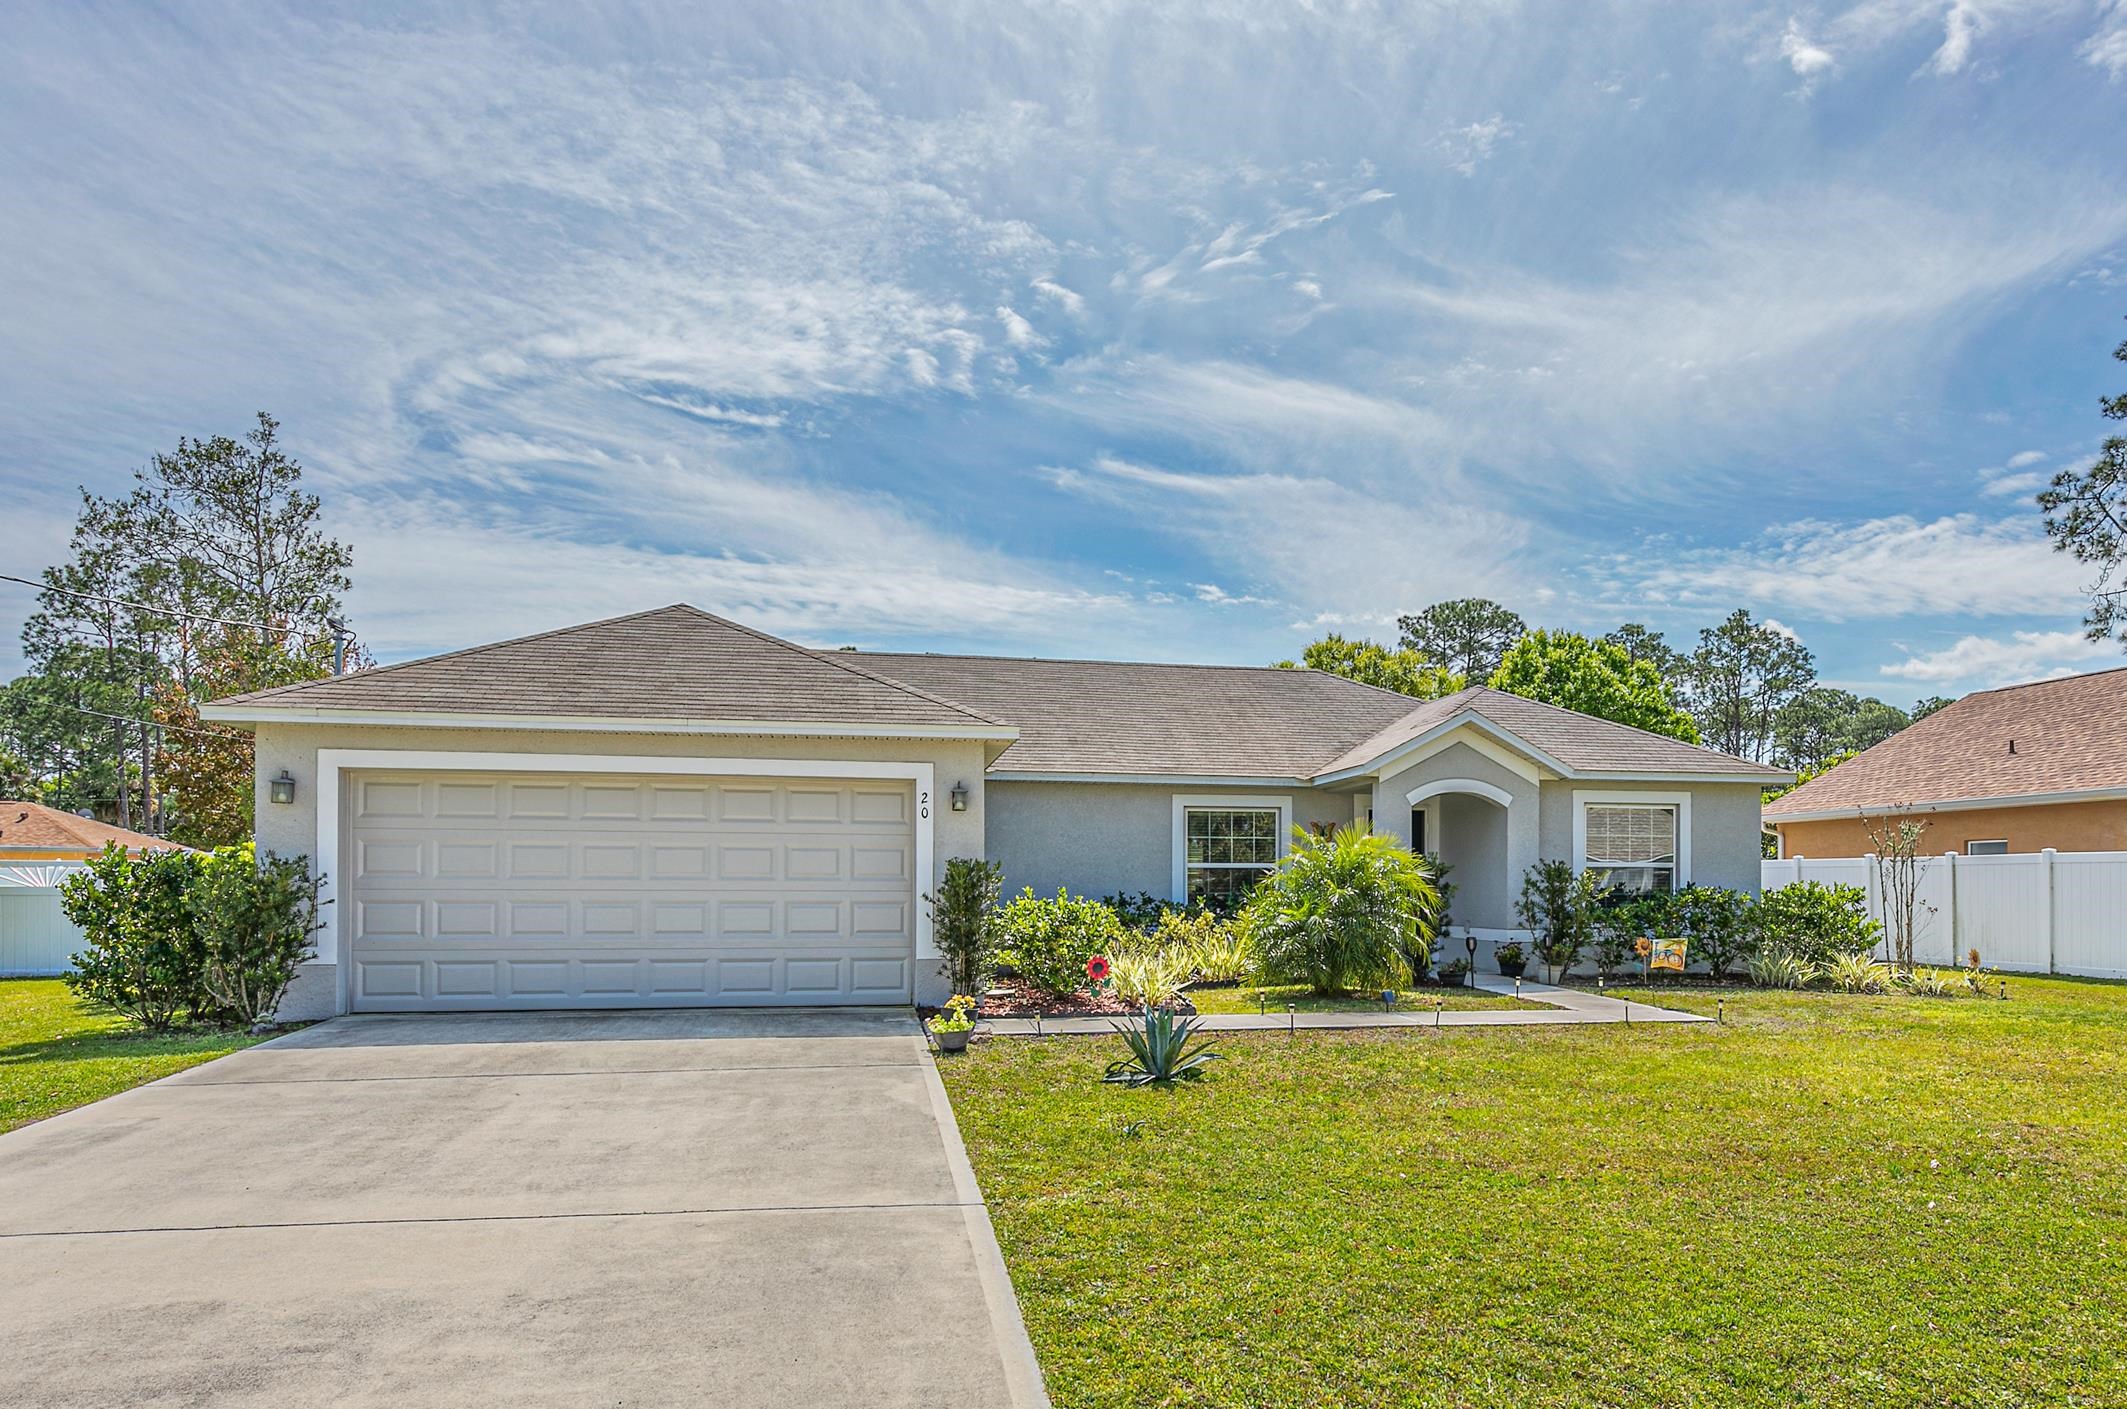 Like New! This 3 Bedroom 2 Bath was built in 2019 "The Carlynn Model  " By Holiday Homes.  Not only is it located convenient to shopping, medical facilities, schools and churches, its a short ride to St Augustine and Daytona Beach.  This home has so many upgrades its Better than new.  The window treatment are done, The kitchen boost up grades such as the appliance package with the double door Refrigerator with freezer drawer on bottom, a large Island with a beautiful modern granite top makes a great Breakfast Bar too. The Kitchen has a good size pantry and the large laundry room comes with the washer and dryer.  The main living space is an open floor plan with a designated Dinning Room, Living Room and Open Kitchen, features a upgraded Luxury Vinyl flooring. Thru the sliders, off of the Living Area is a covered screened lanai.  The bedroom floors are carpeted (in good condition).  The Electric Fireplace in the Living Room will stay. Check out the bathrooms both have easy care finishes.